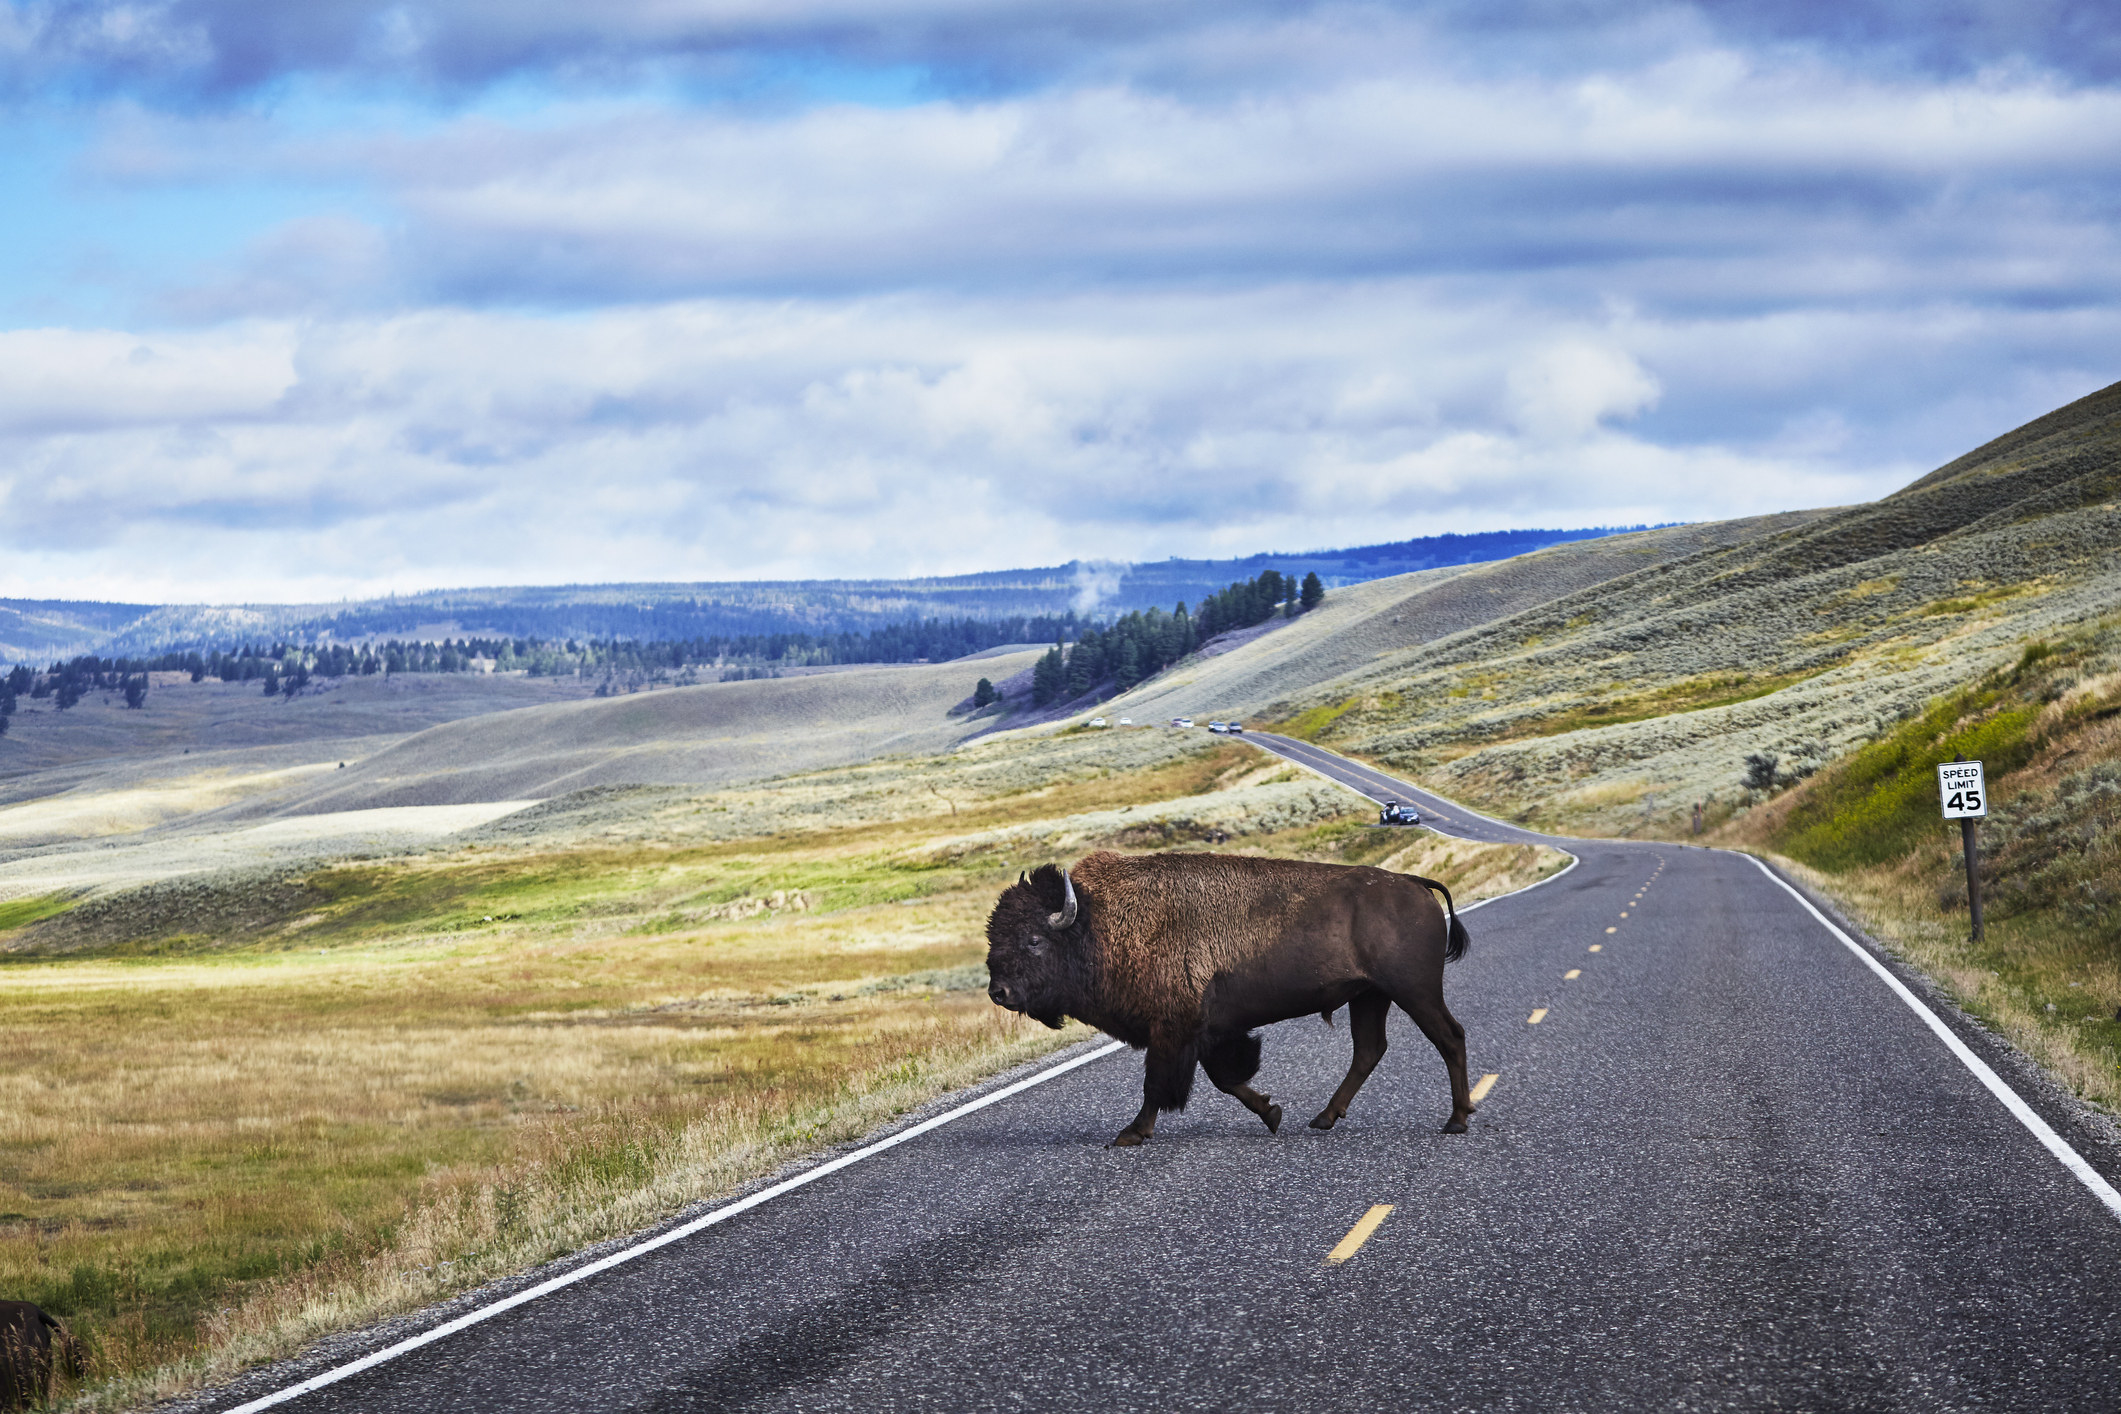 A bison crossing the road in Yellowstone National Park.